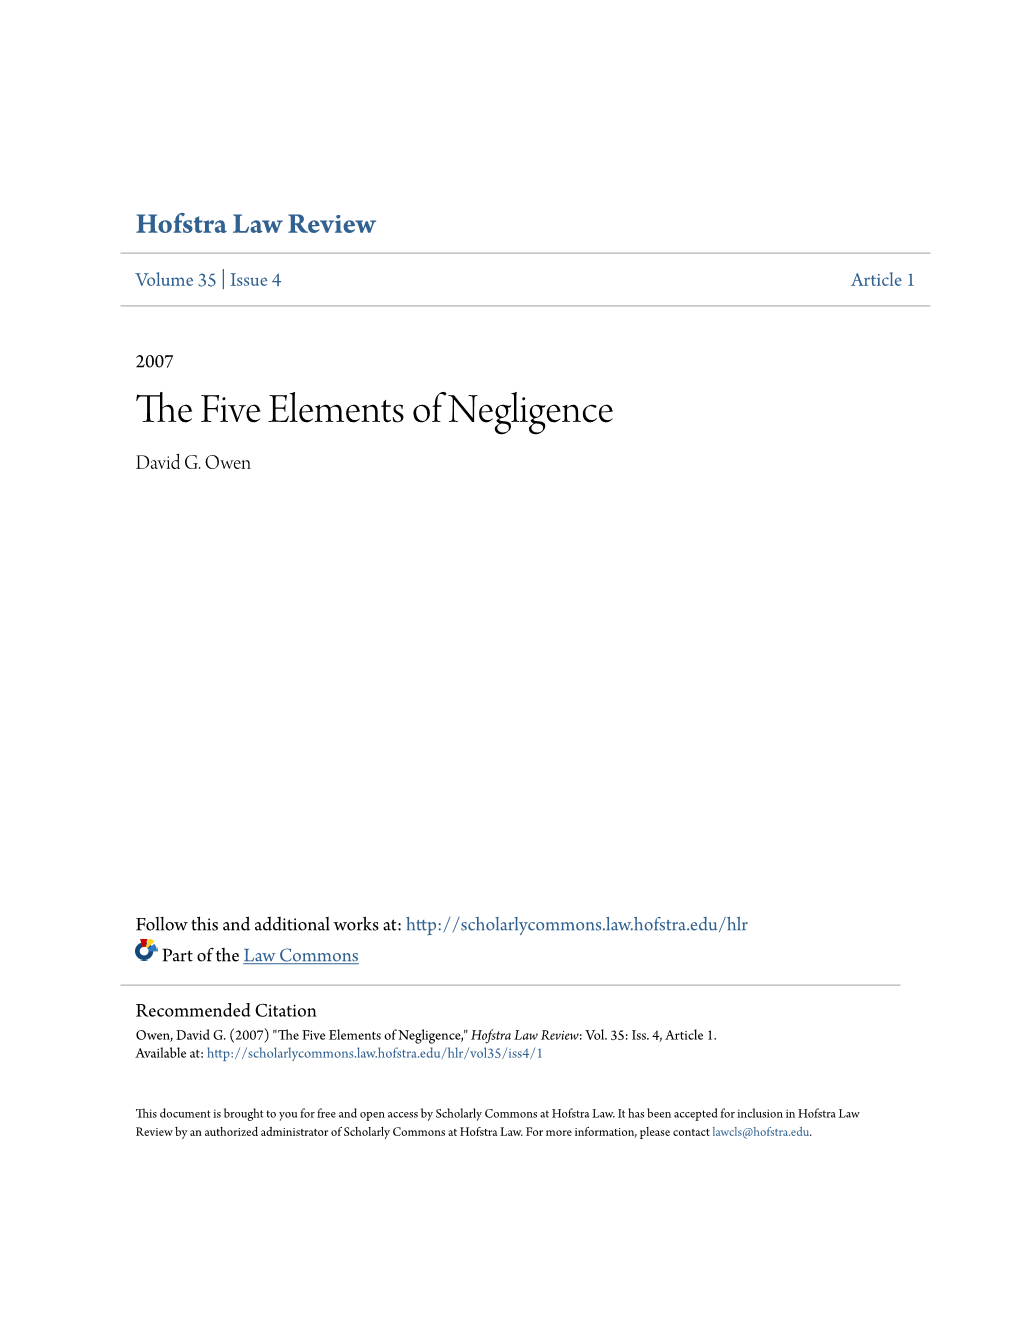 The Five Elements of Negligence